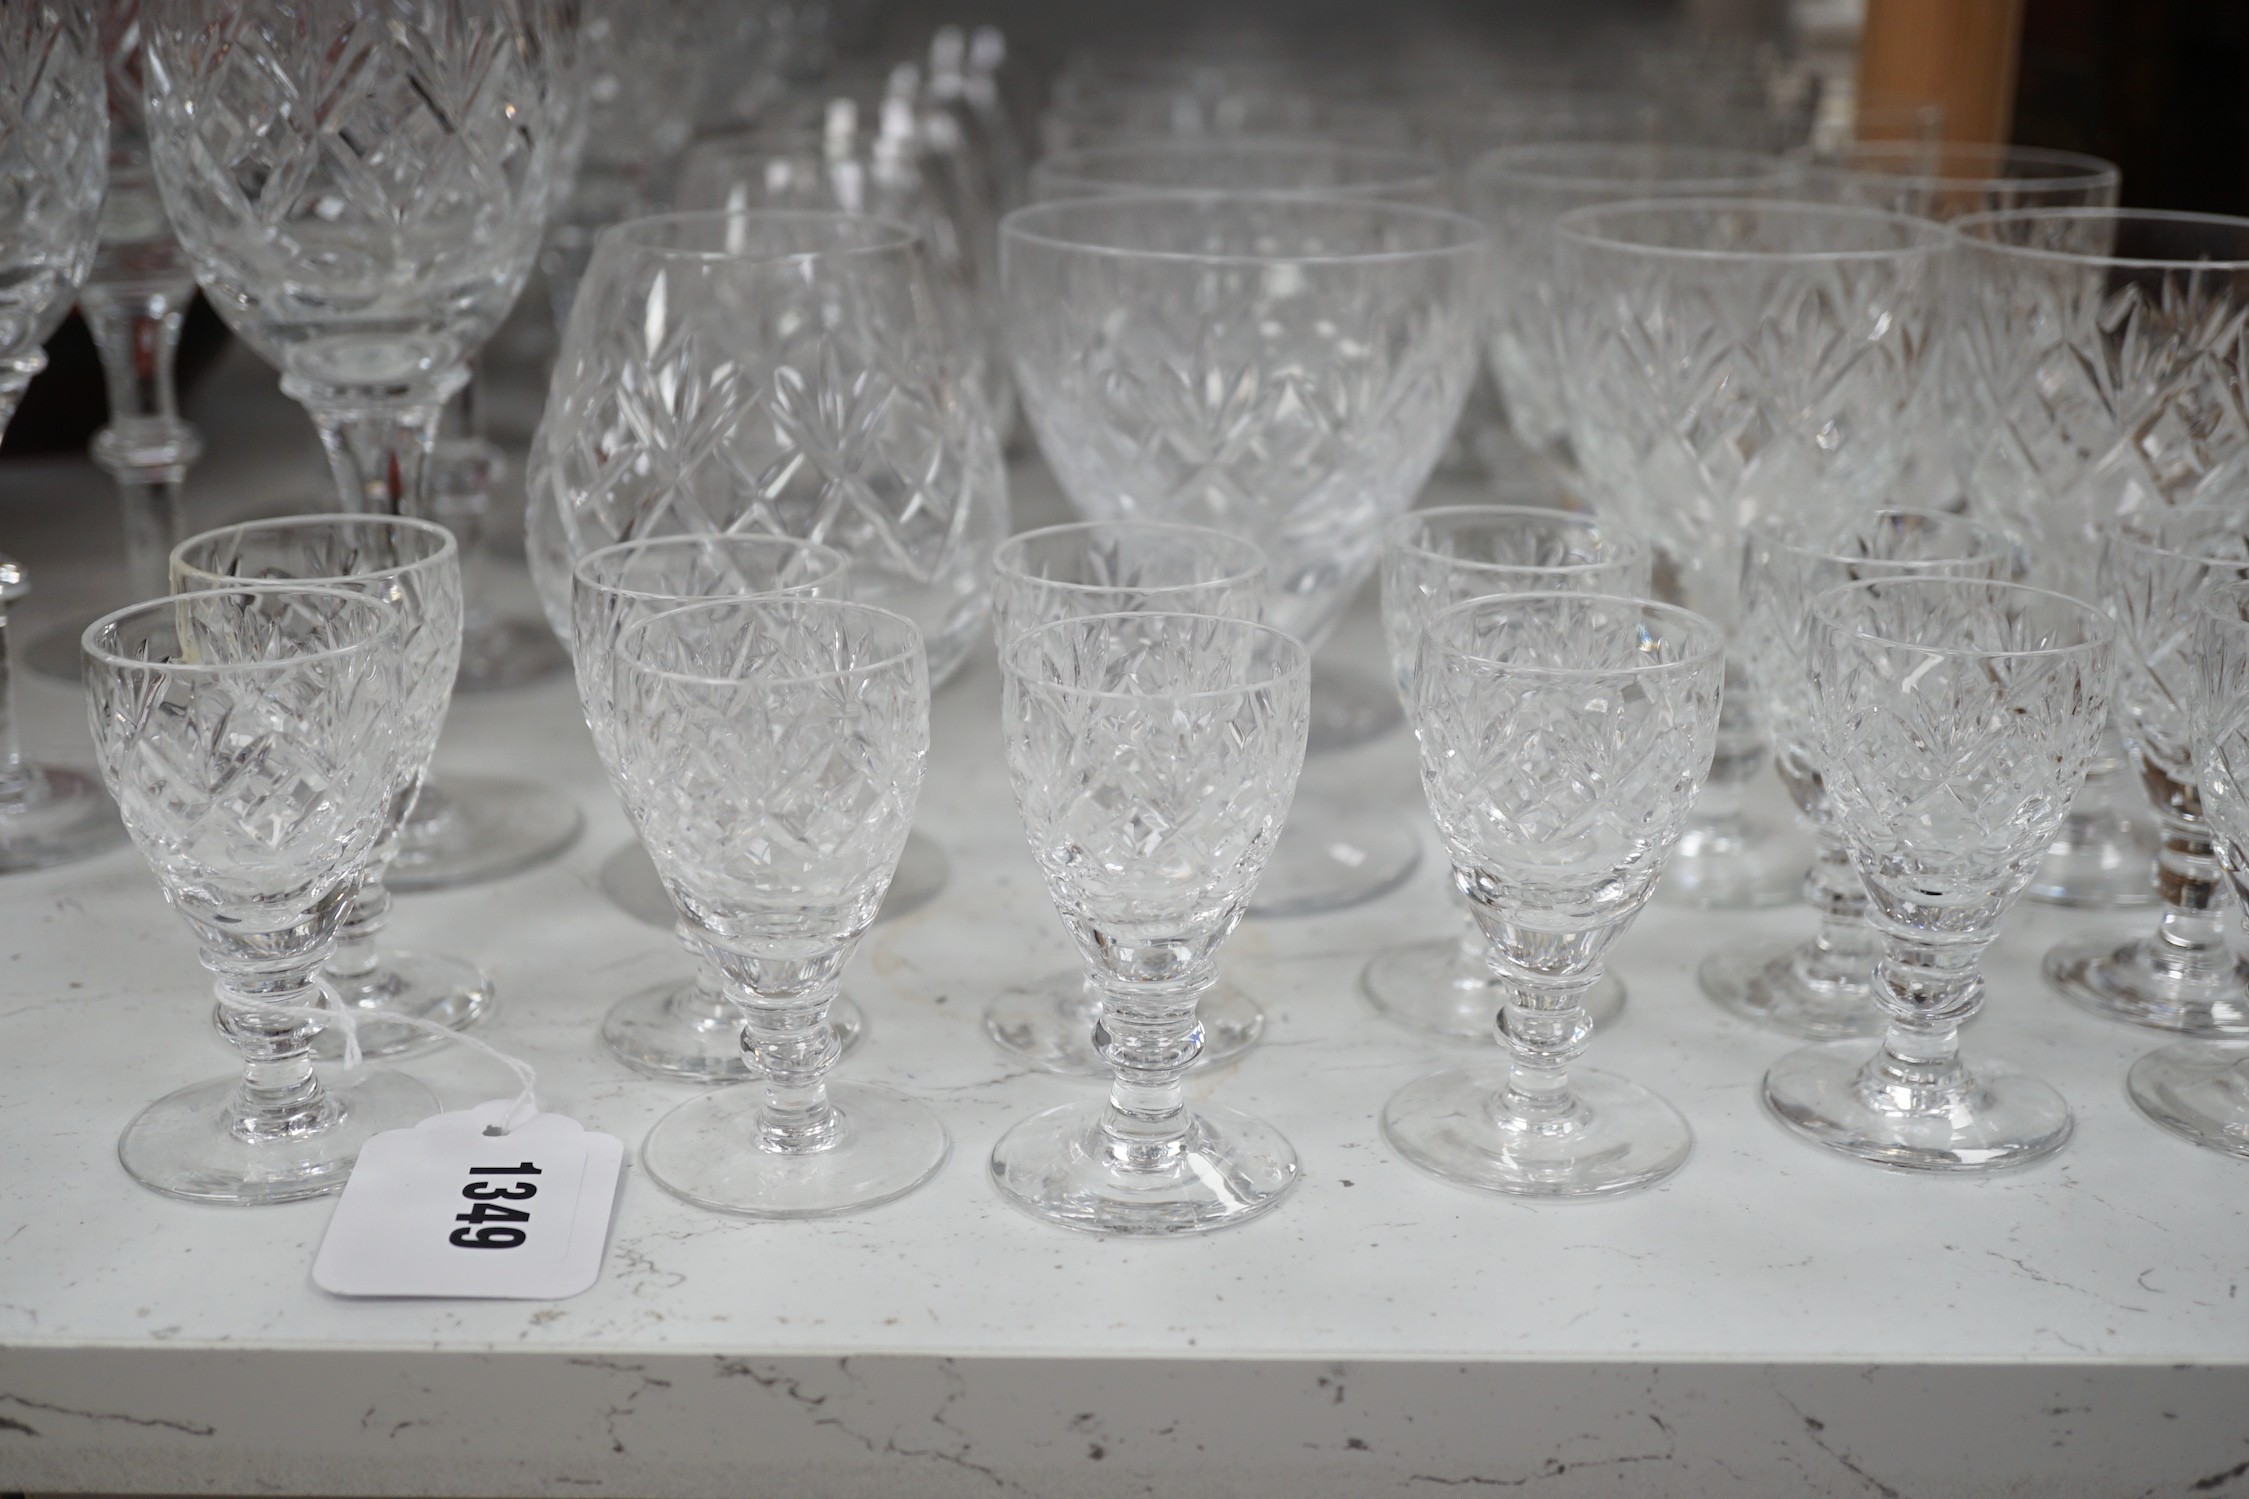 A collection of Royal Doulton glassware, to include: wine glasses, brandy balloons, etc.